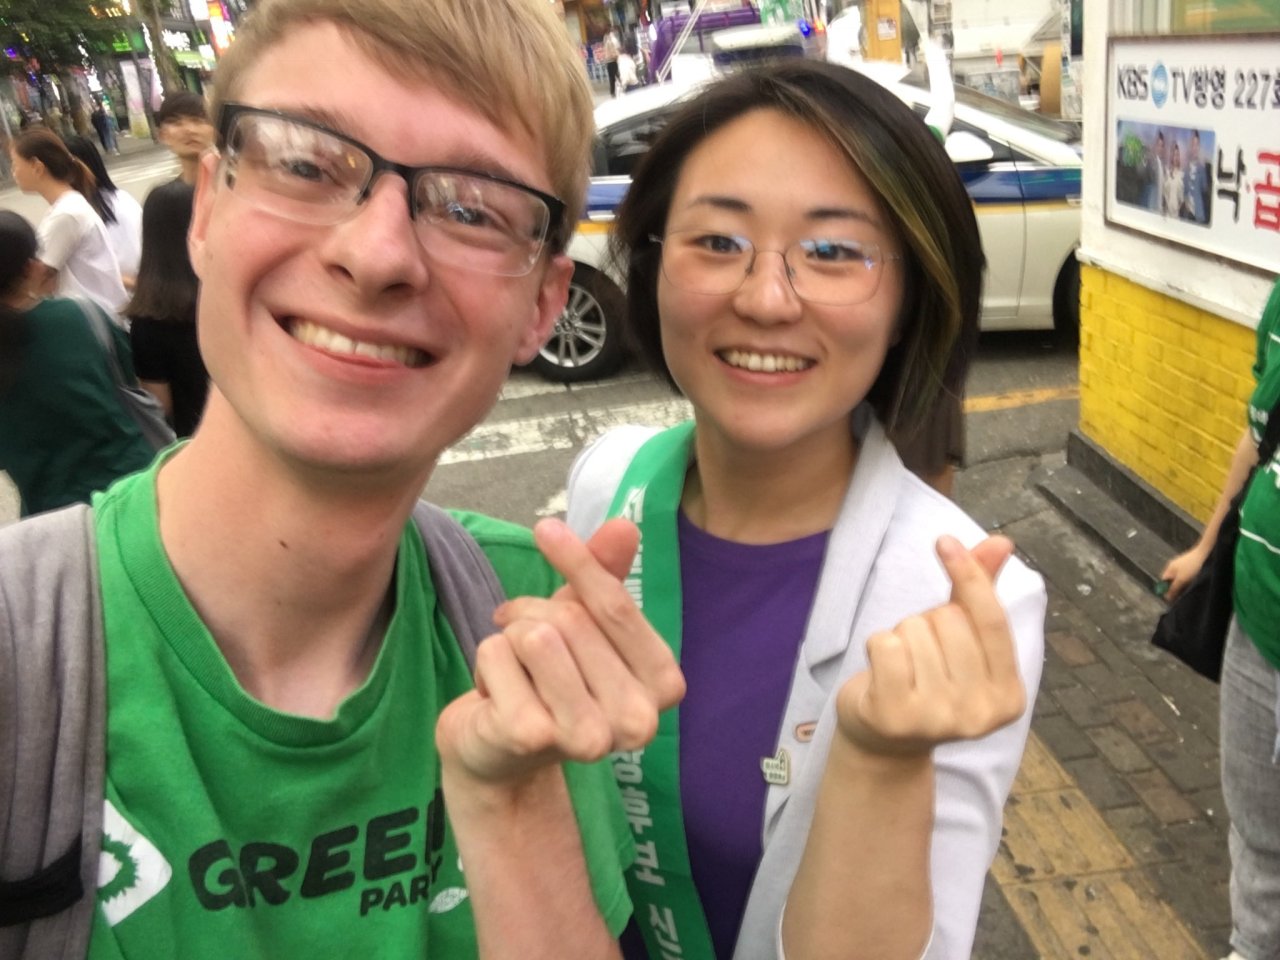 American Green Party member Austin Bashore pictured next to 31-year-old politician Shin Ji-ye on June 9, 2018 in Mapo during her run for mayor. (Austin Bashore)